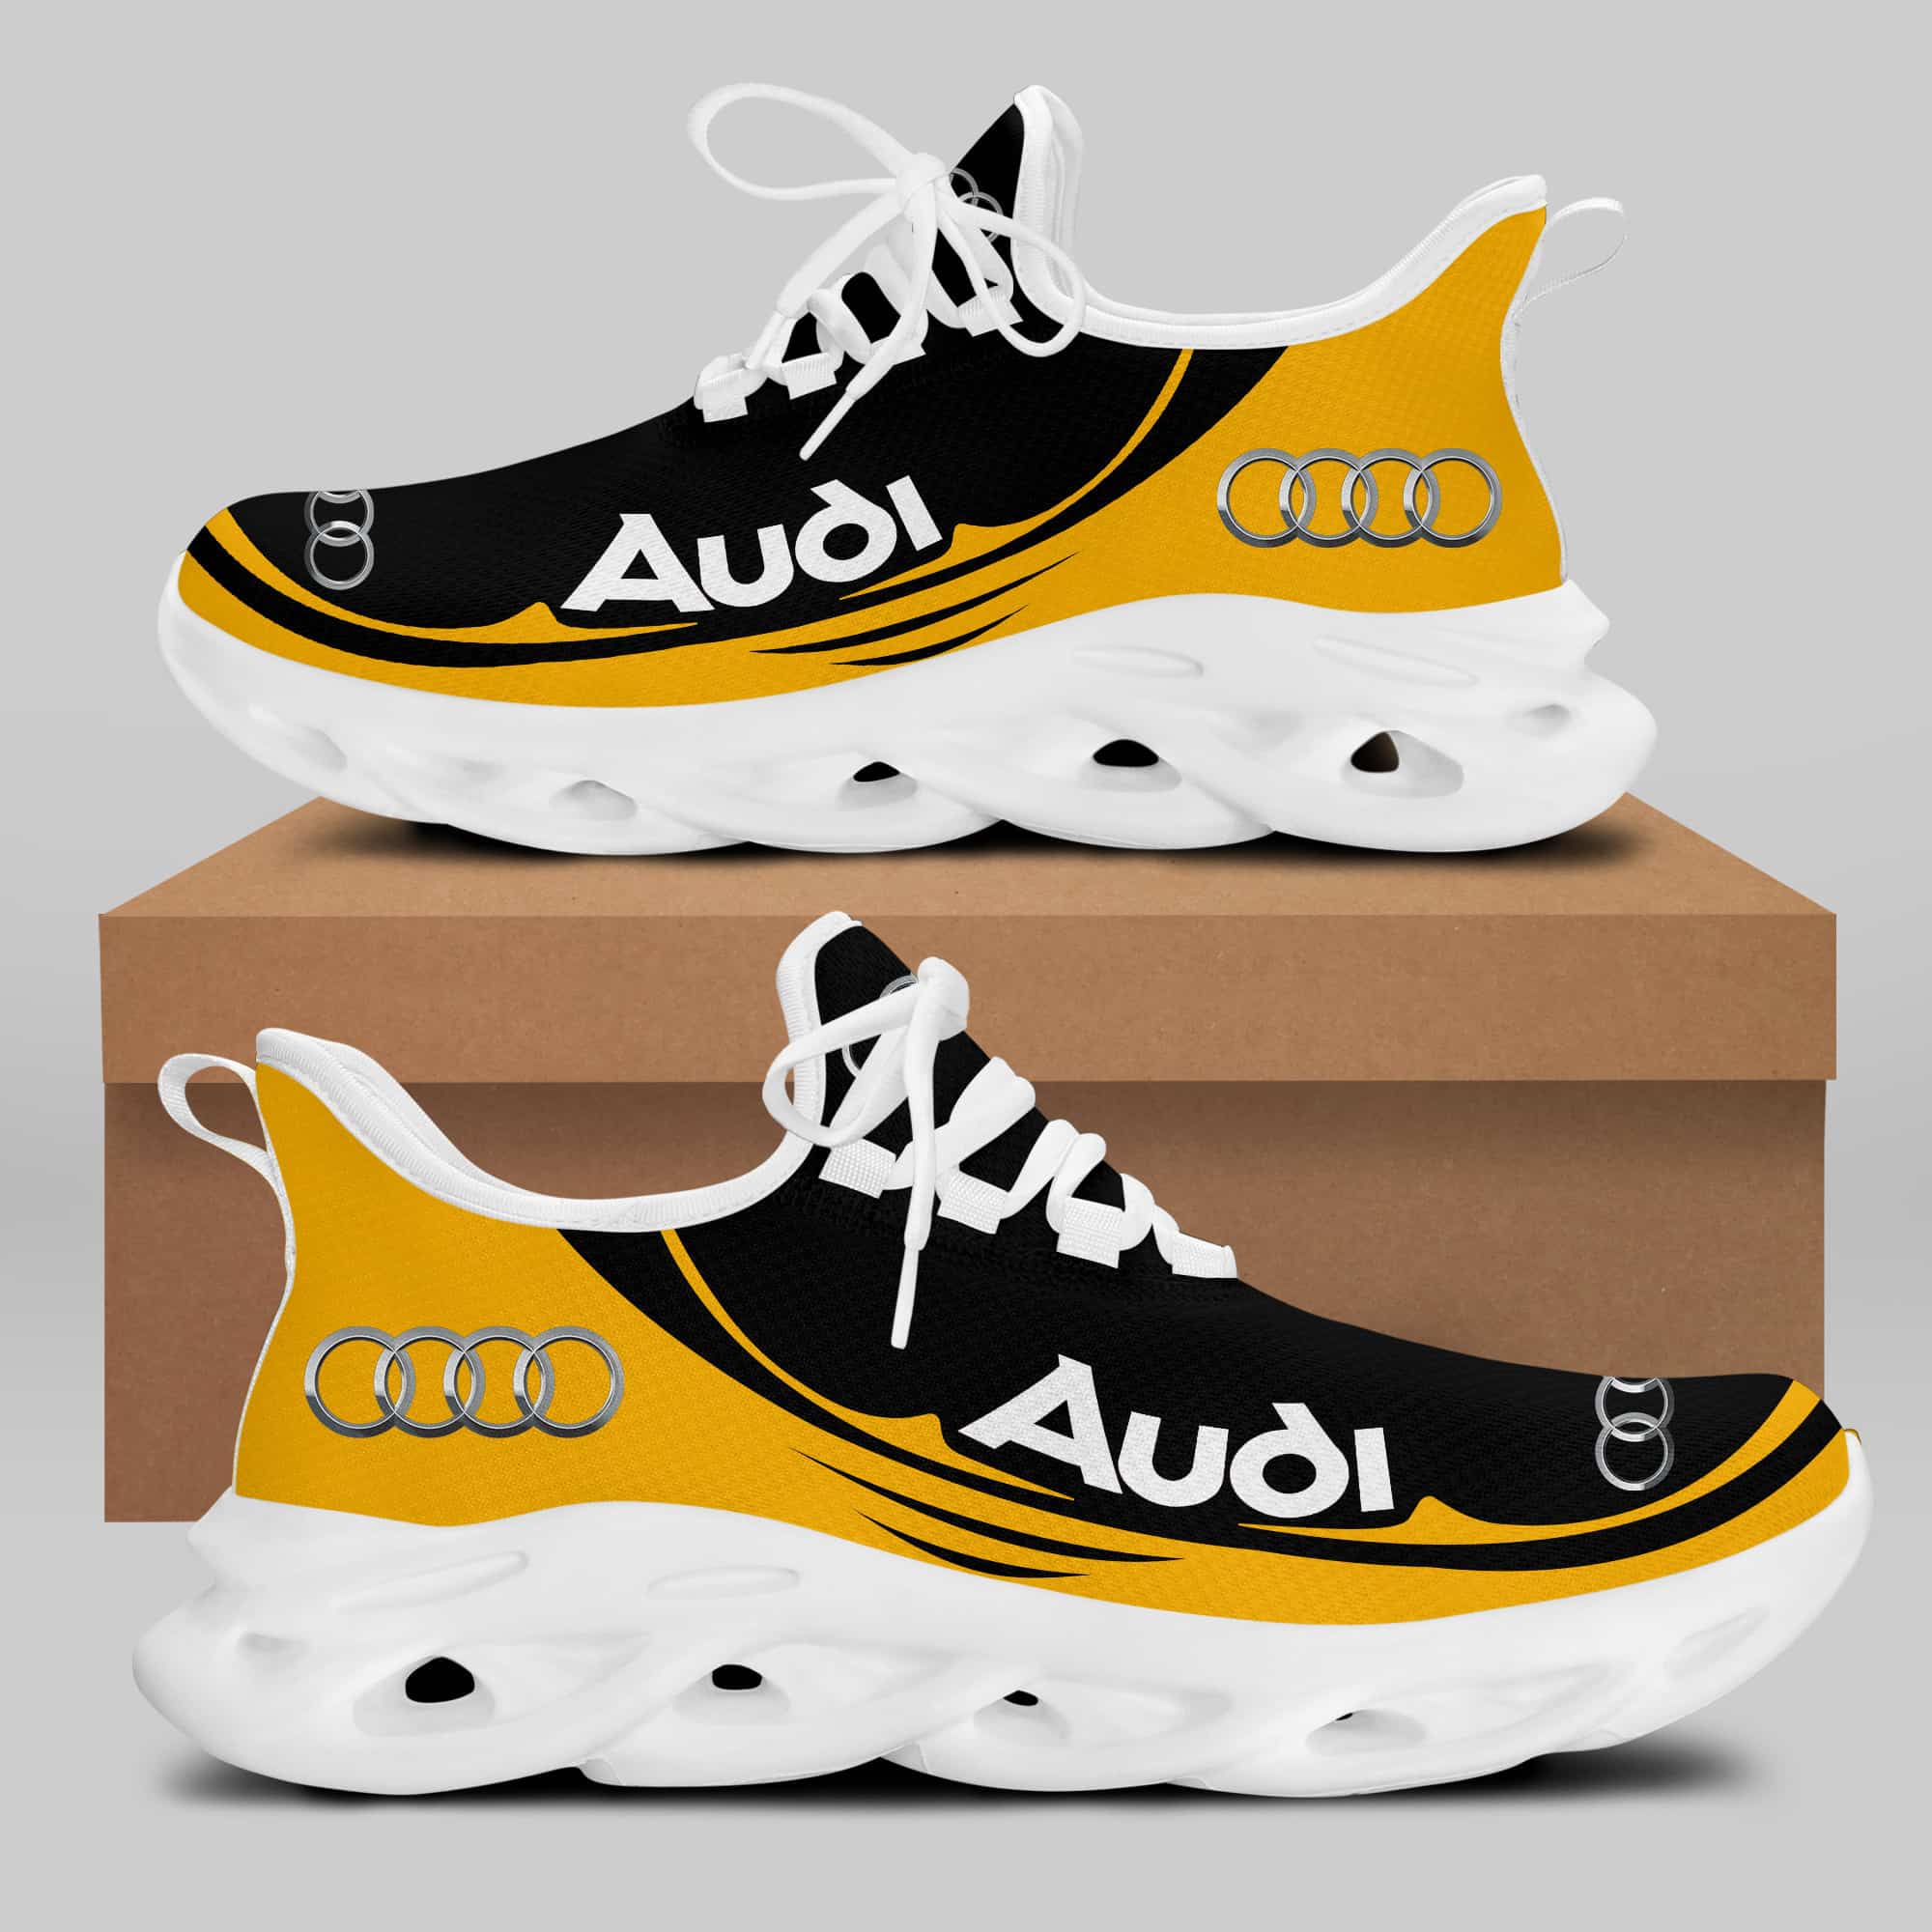 Audi Sport Running Shoes Max Soul Shoes Sneakers Ver 45 2